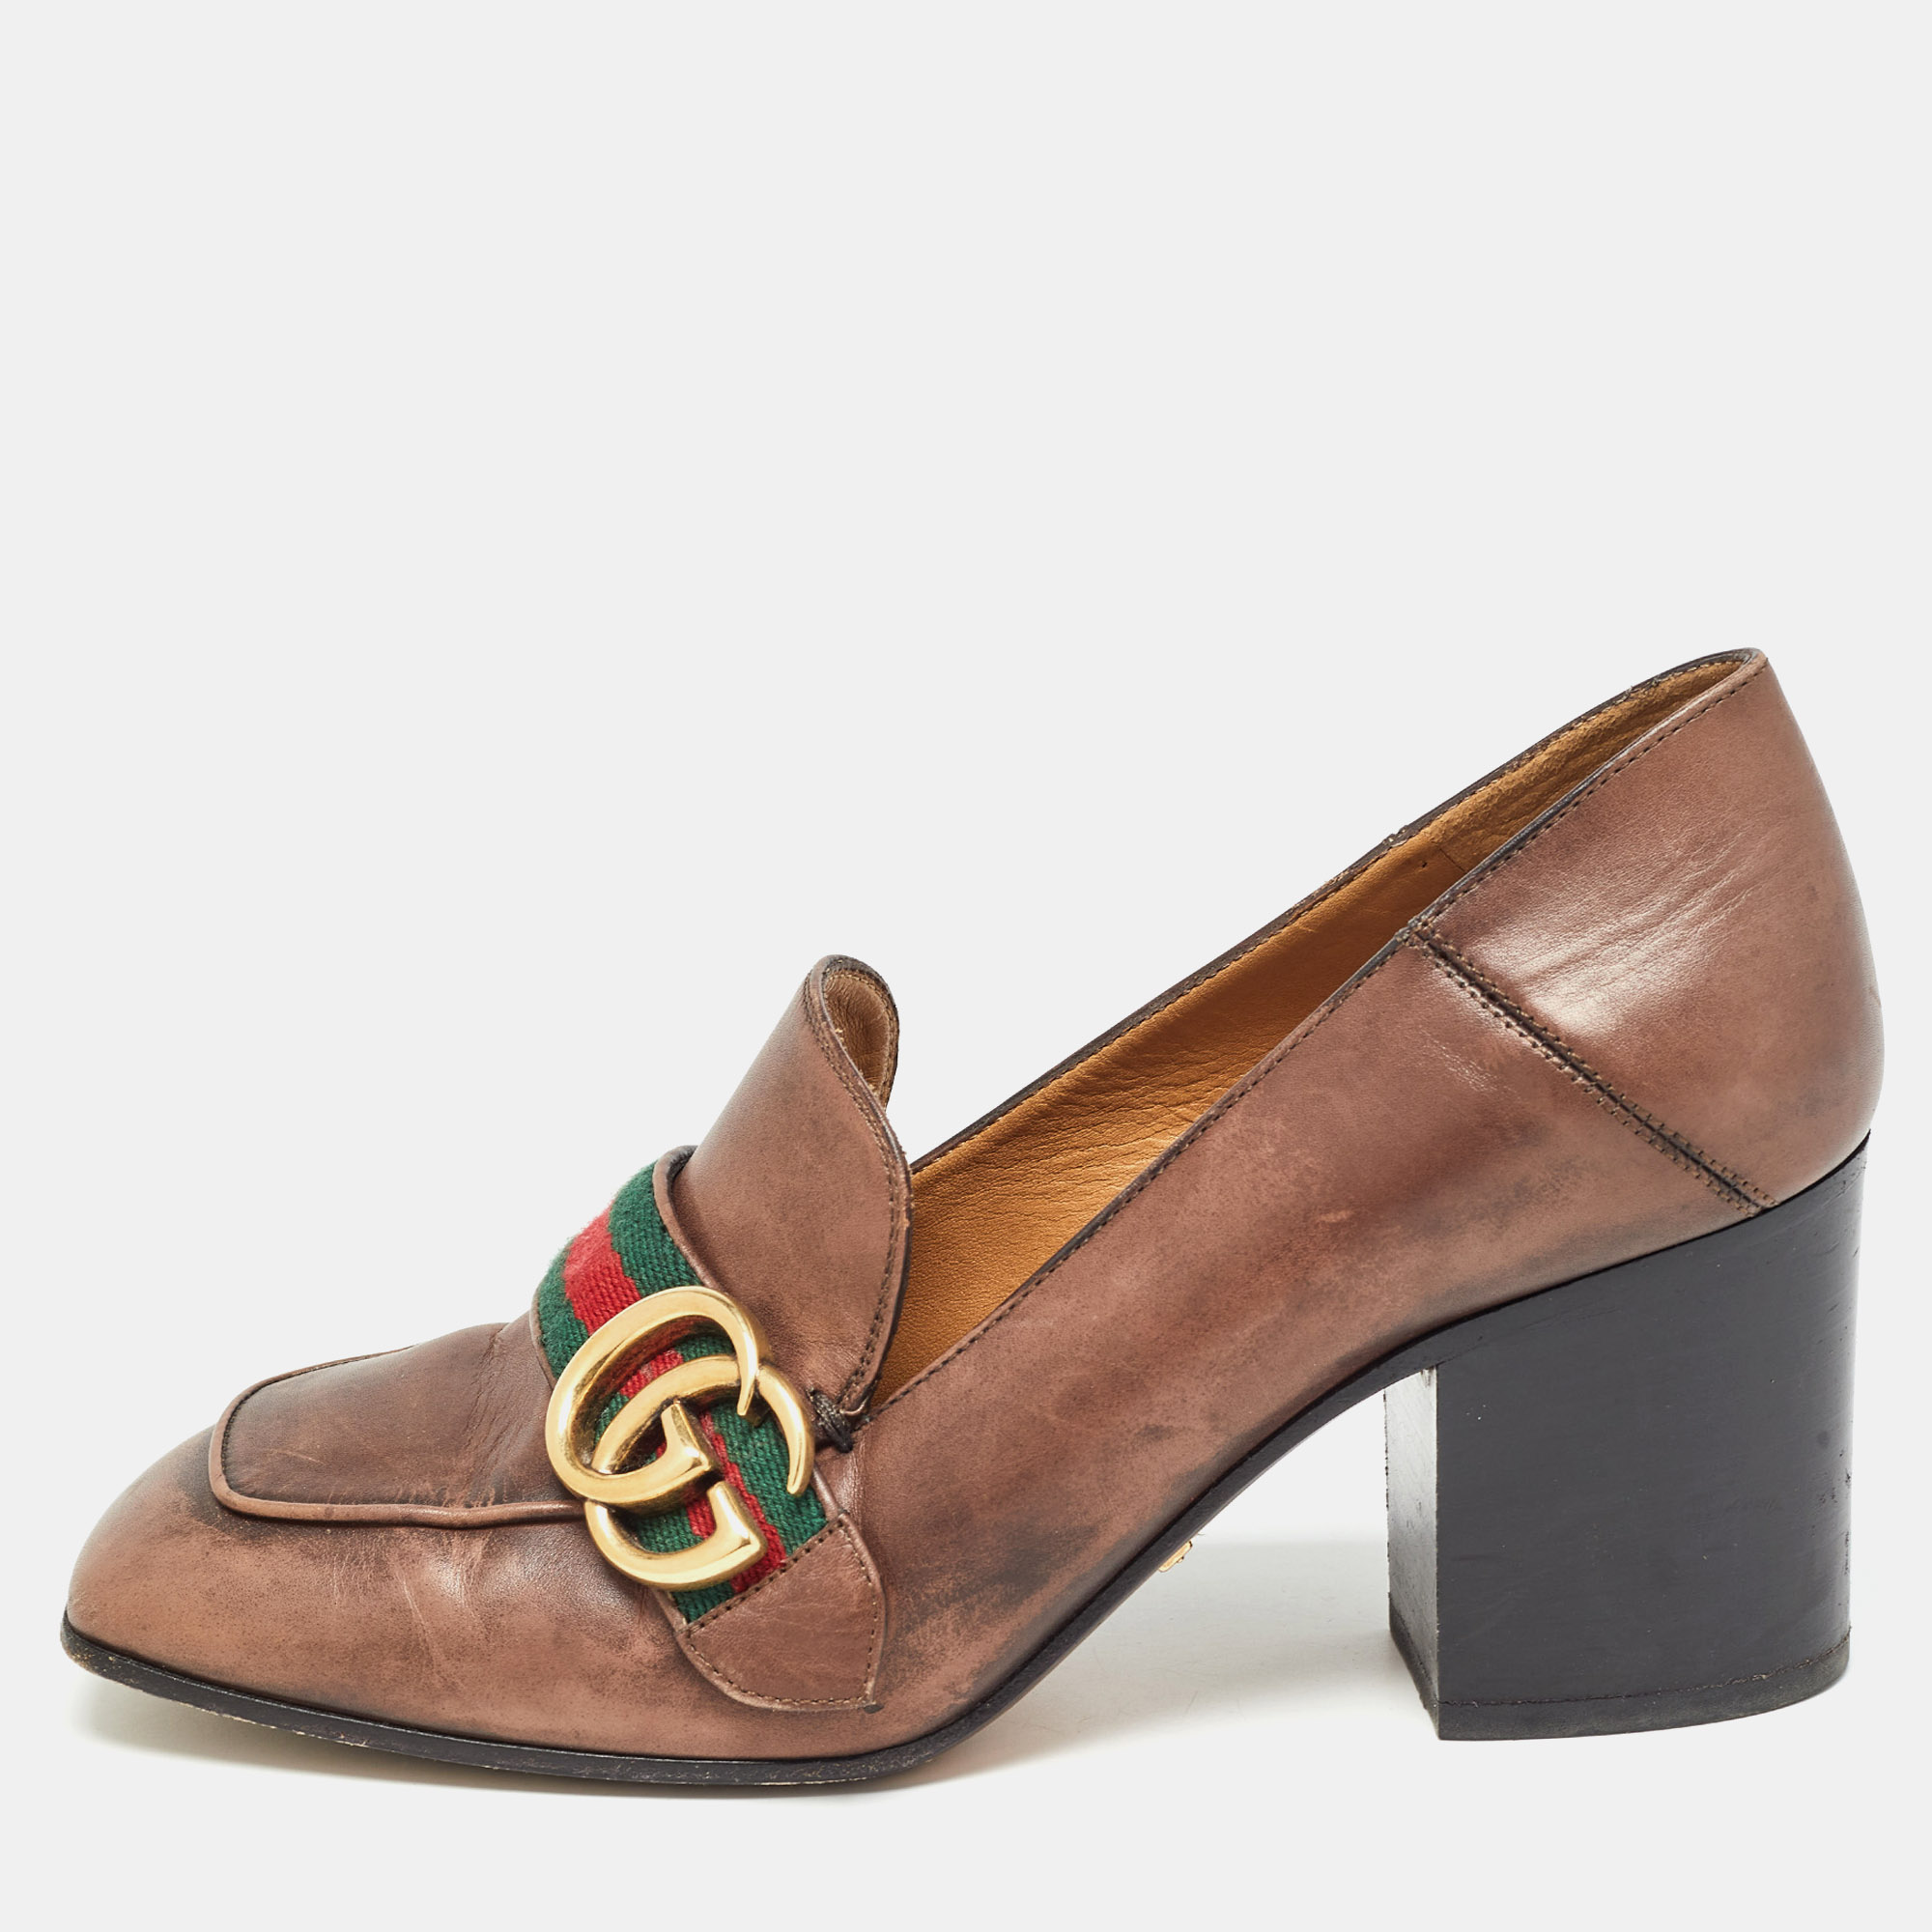 Gucci brown leather block heel loafer  pumps size 36.5